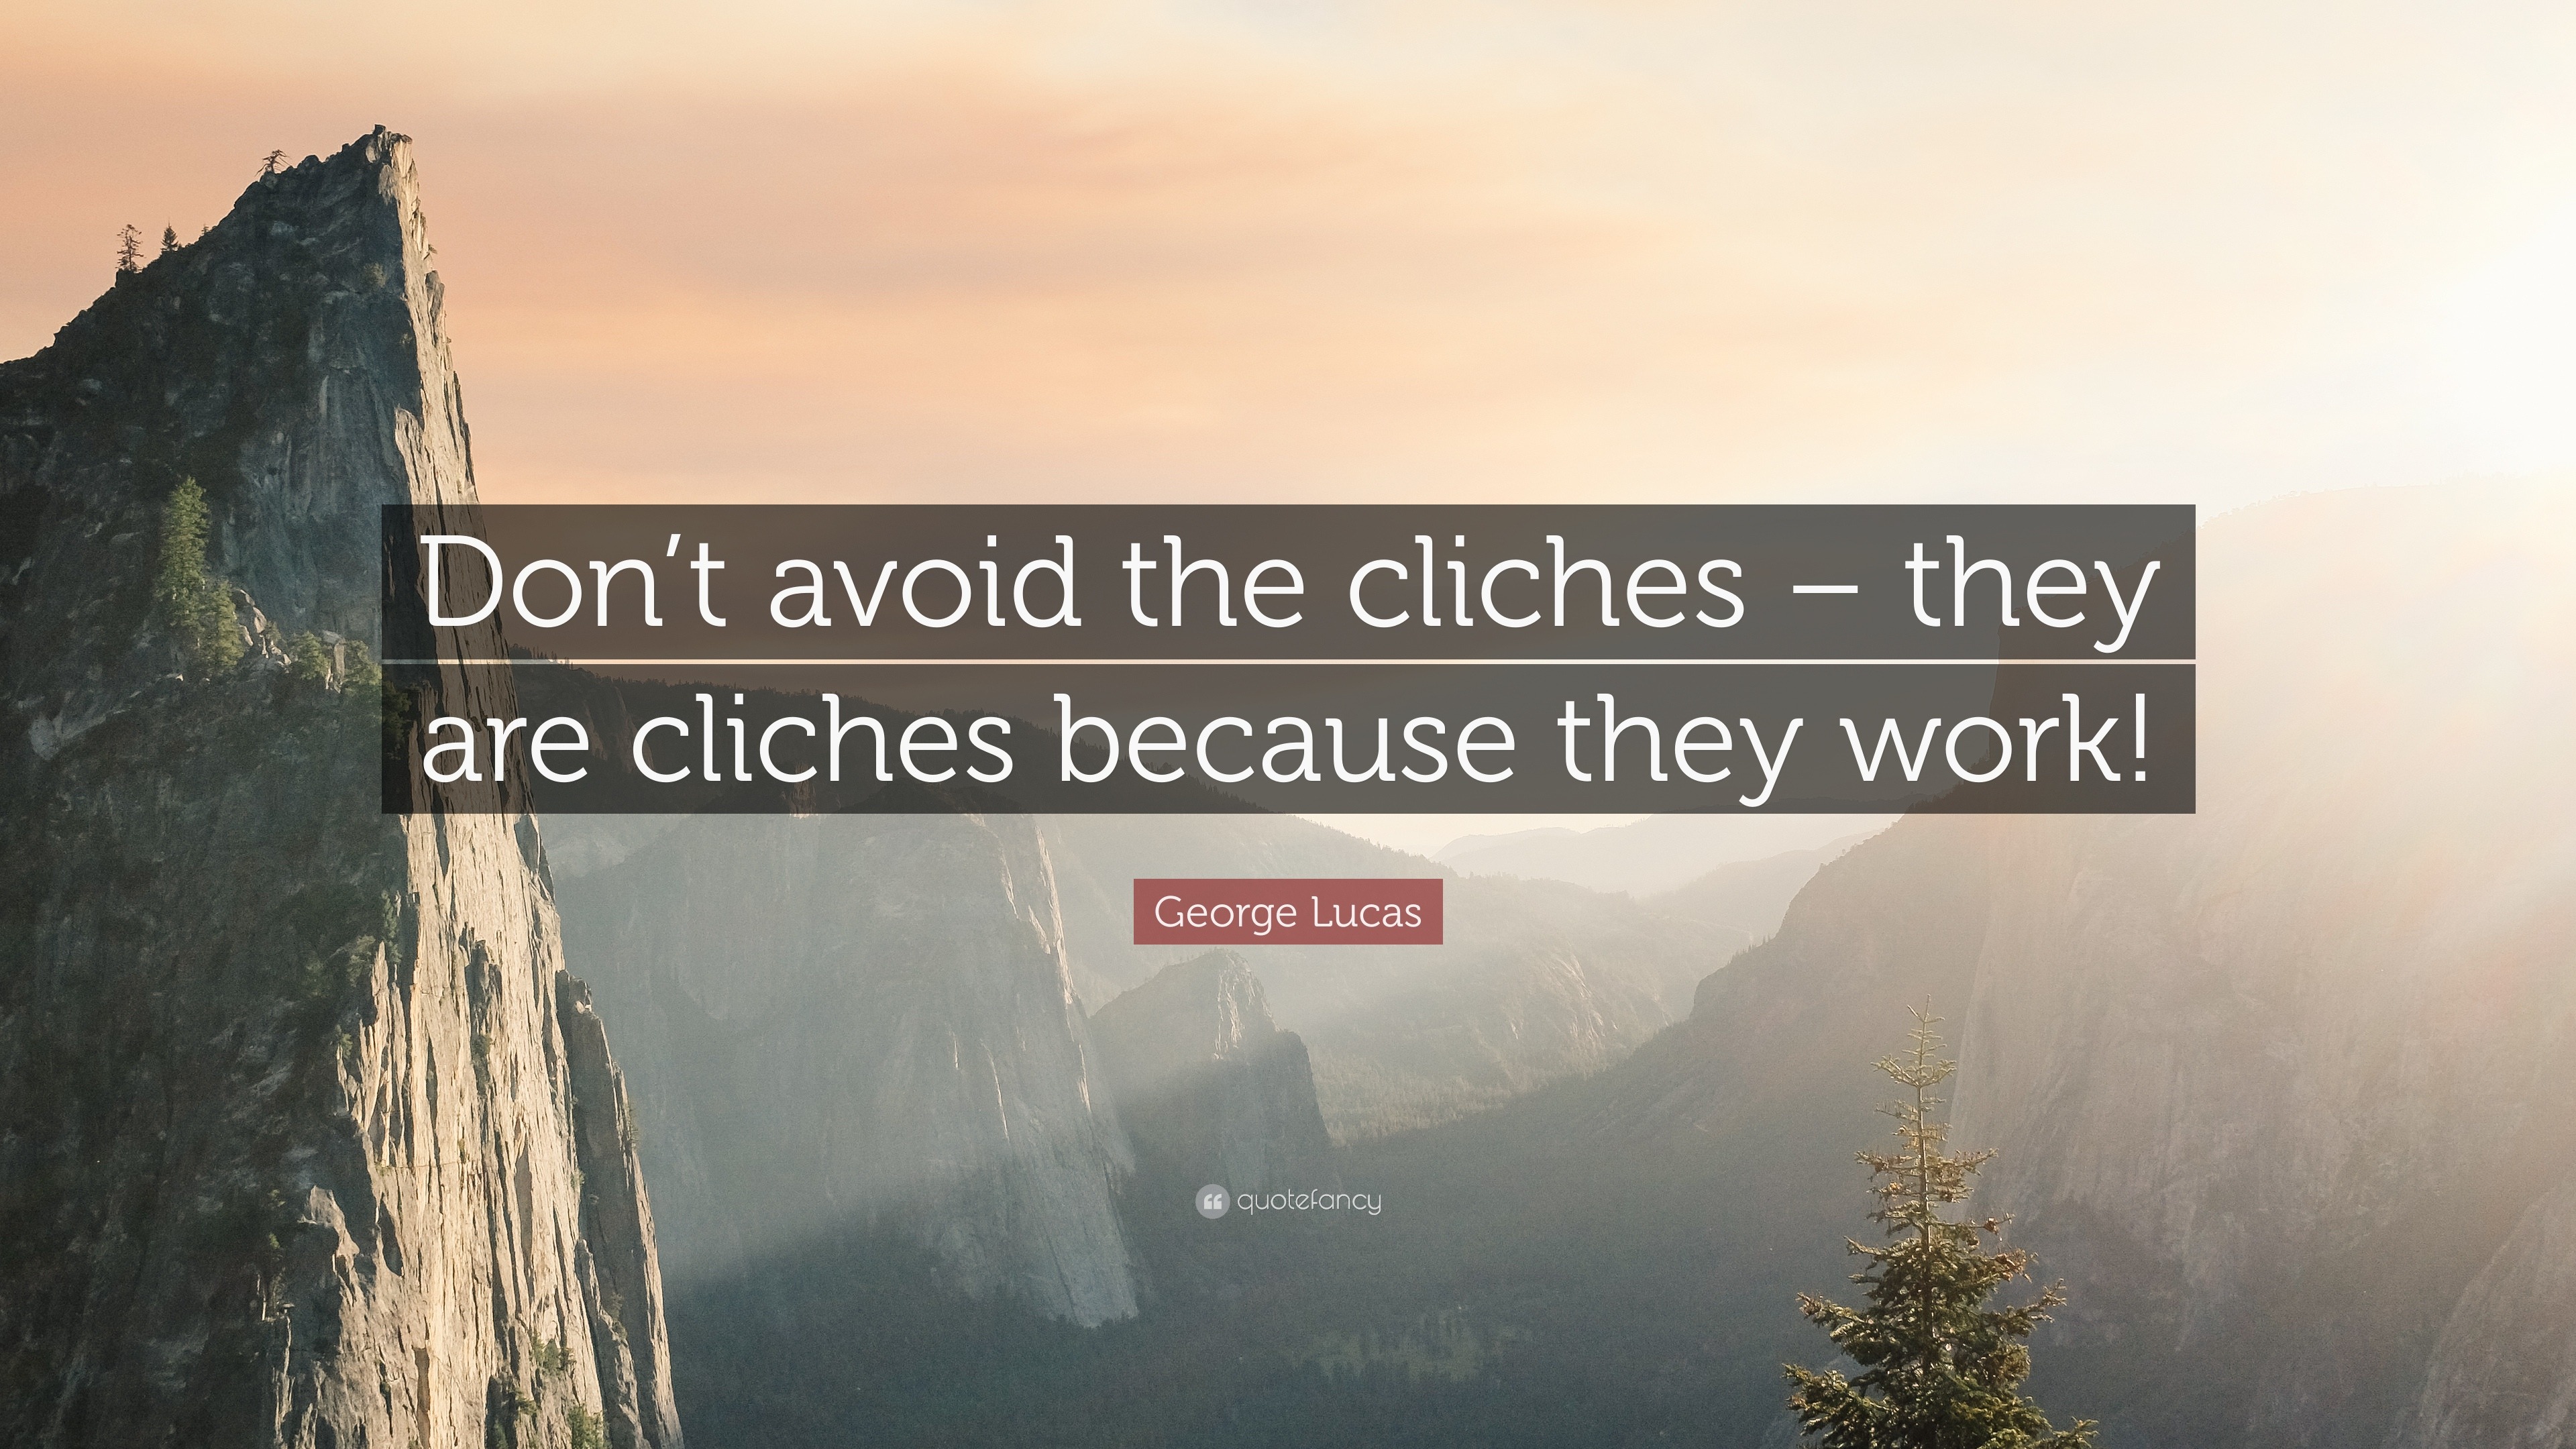 Clichés—What They Are And Why You Should Avoid Them